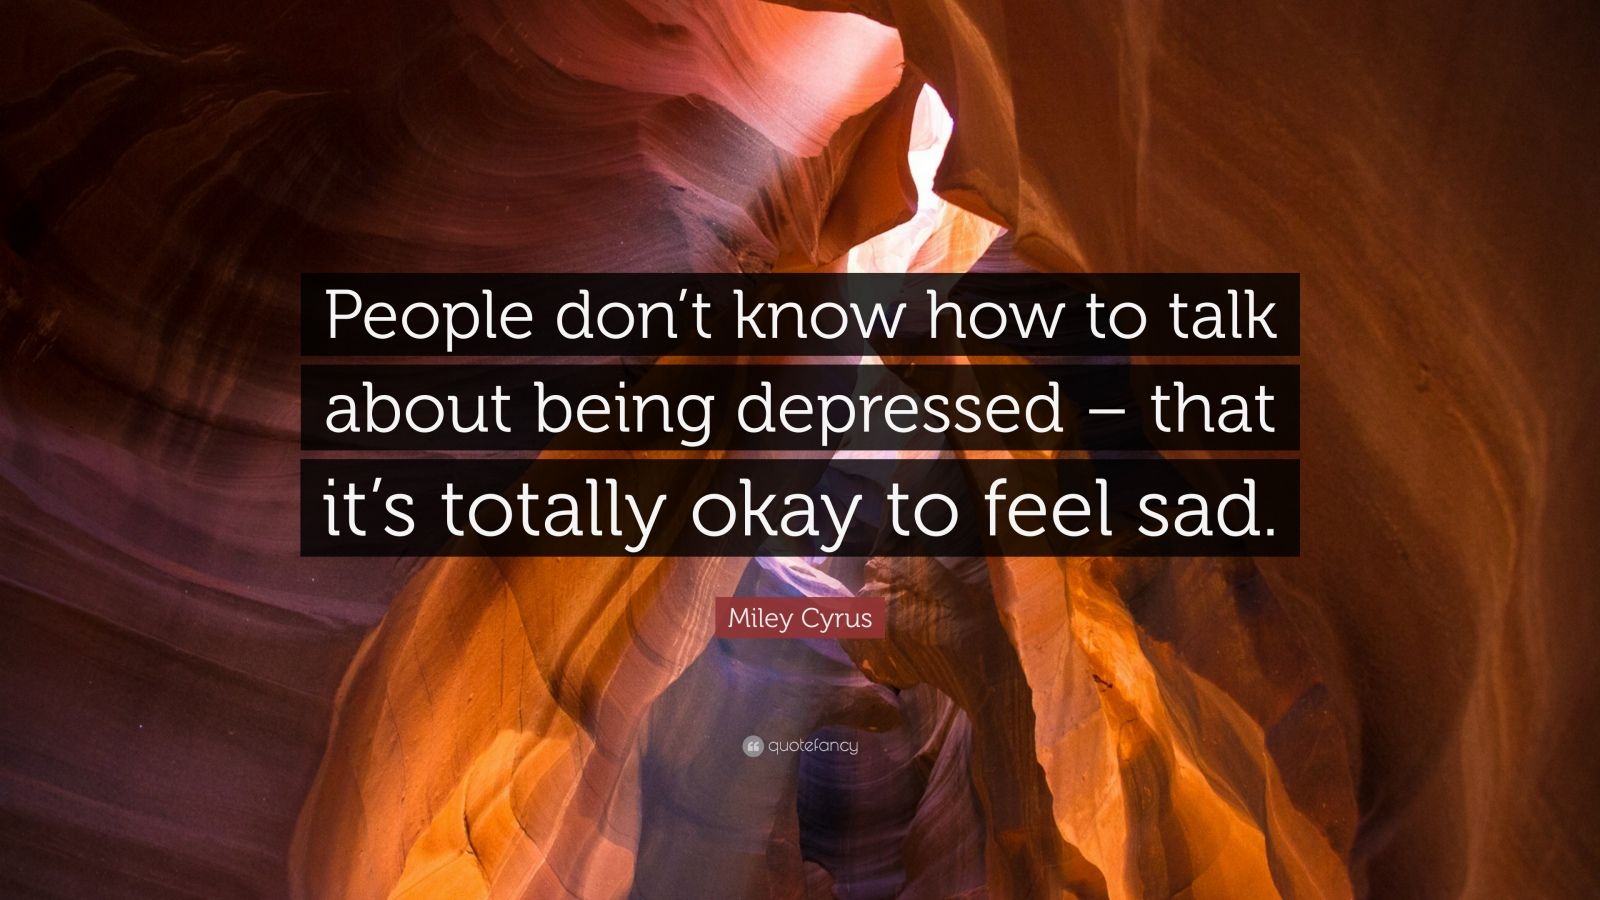 Miley Cyrus Quote: “People don’t know how to talk about being depressed ...